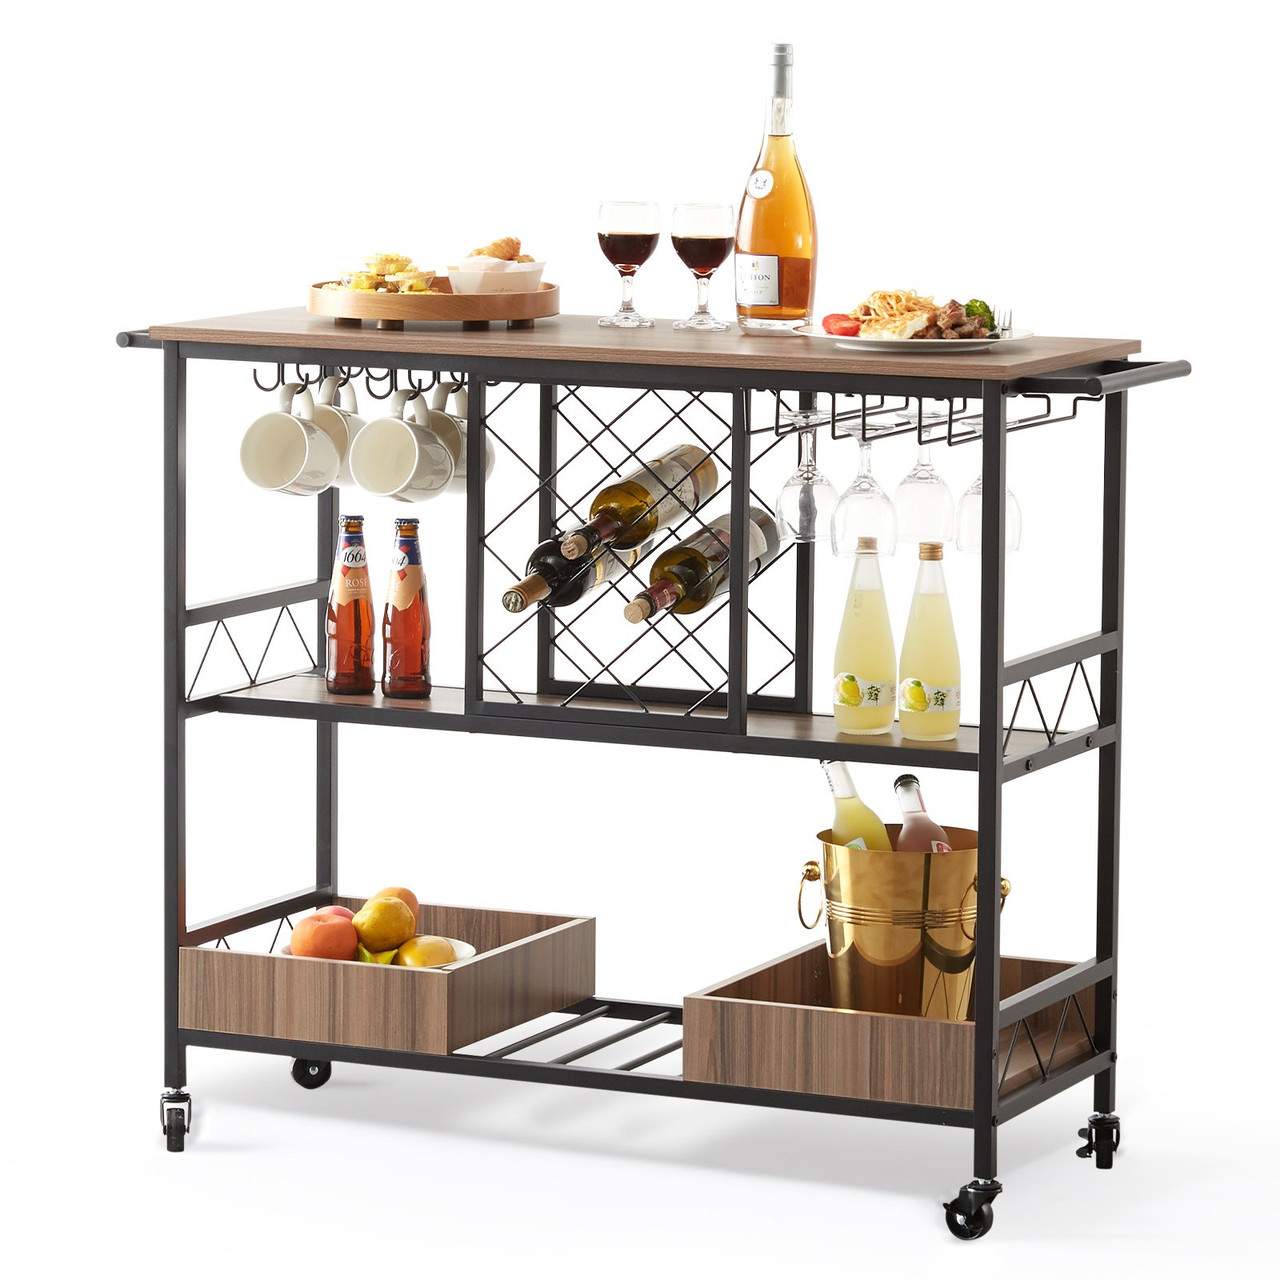 3-Tier Bar Serving Cart Rolling Trolley with Wine Grid Glass Holder 300LBS